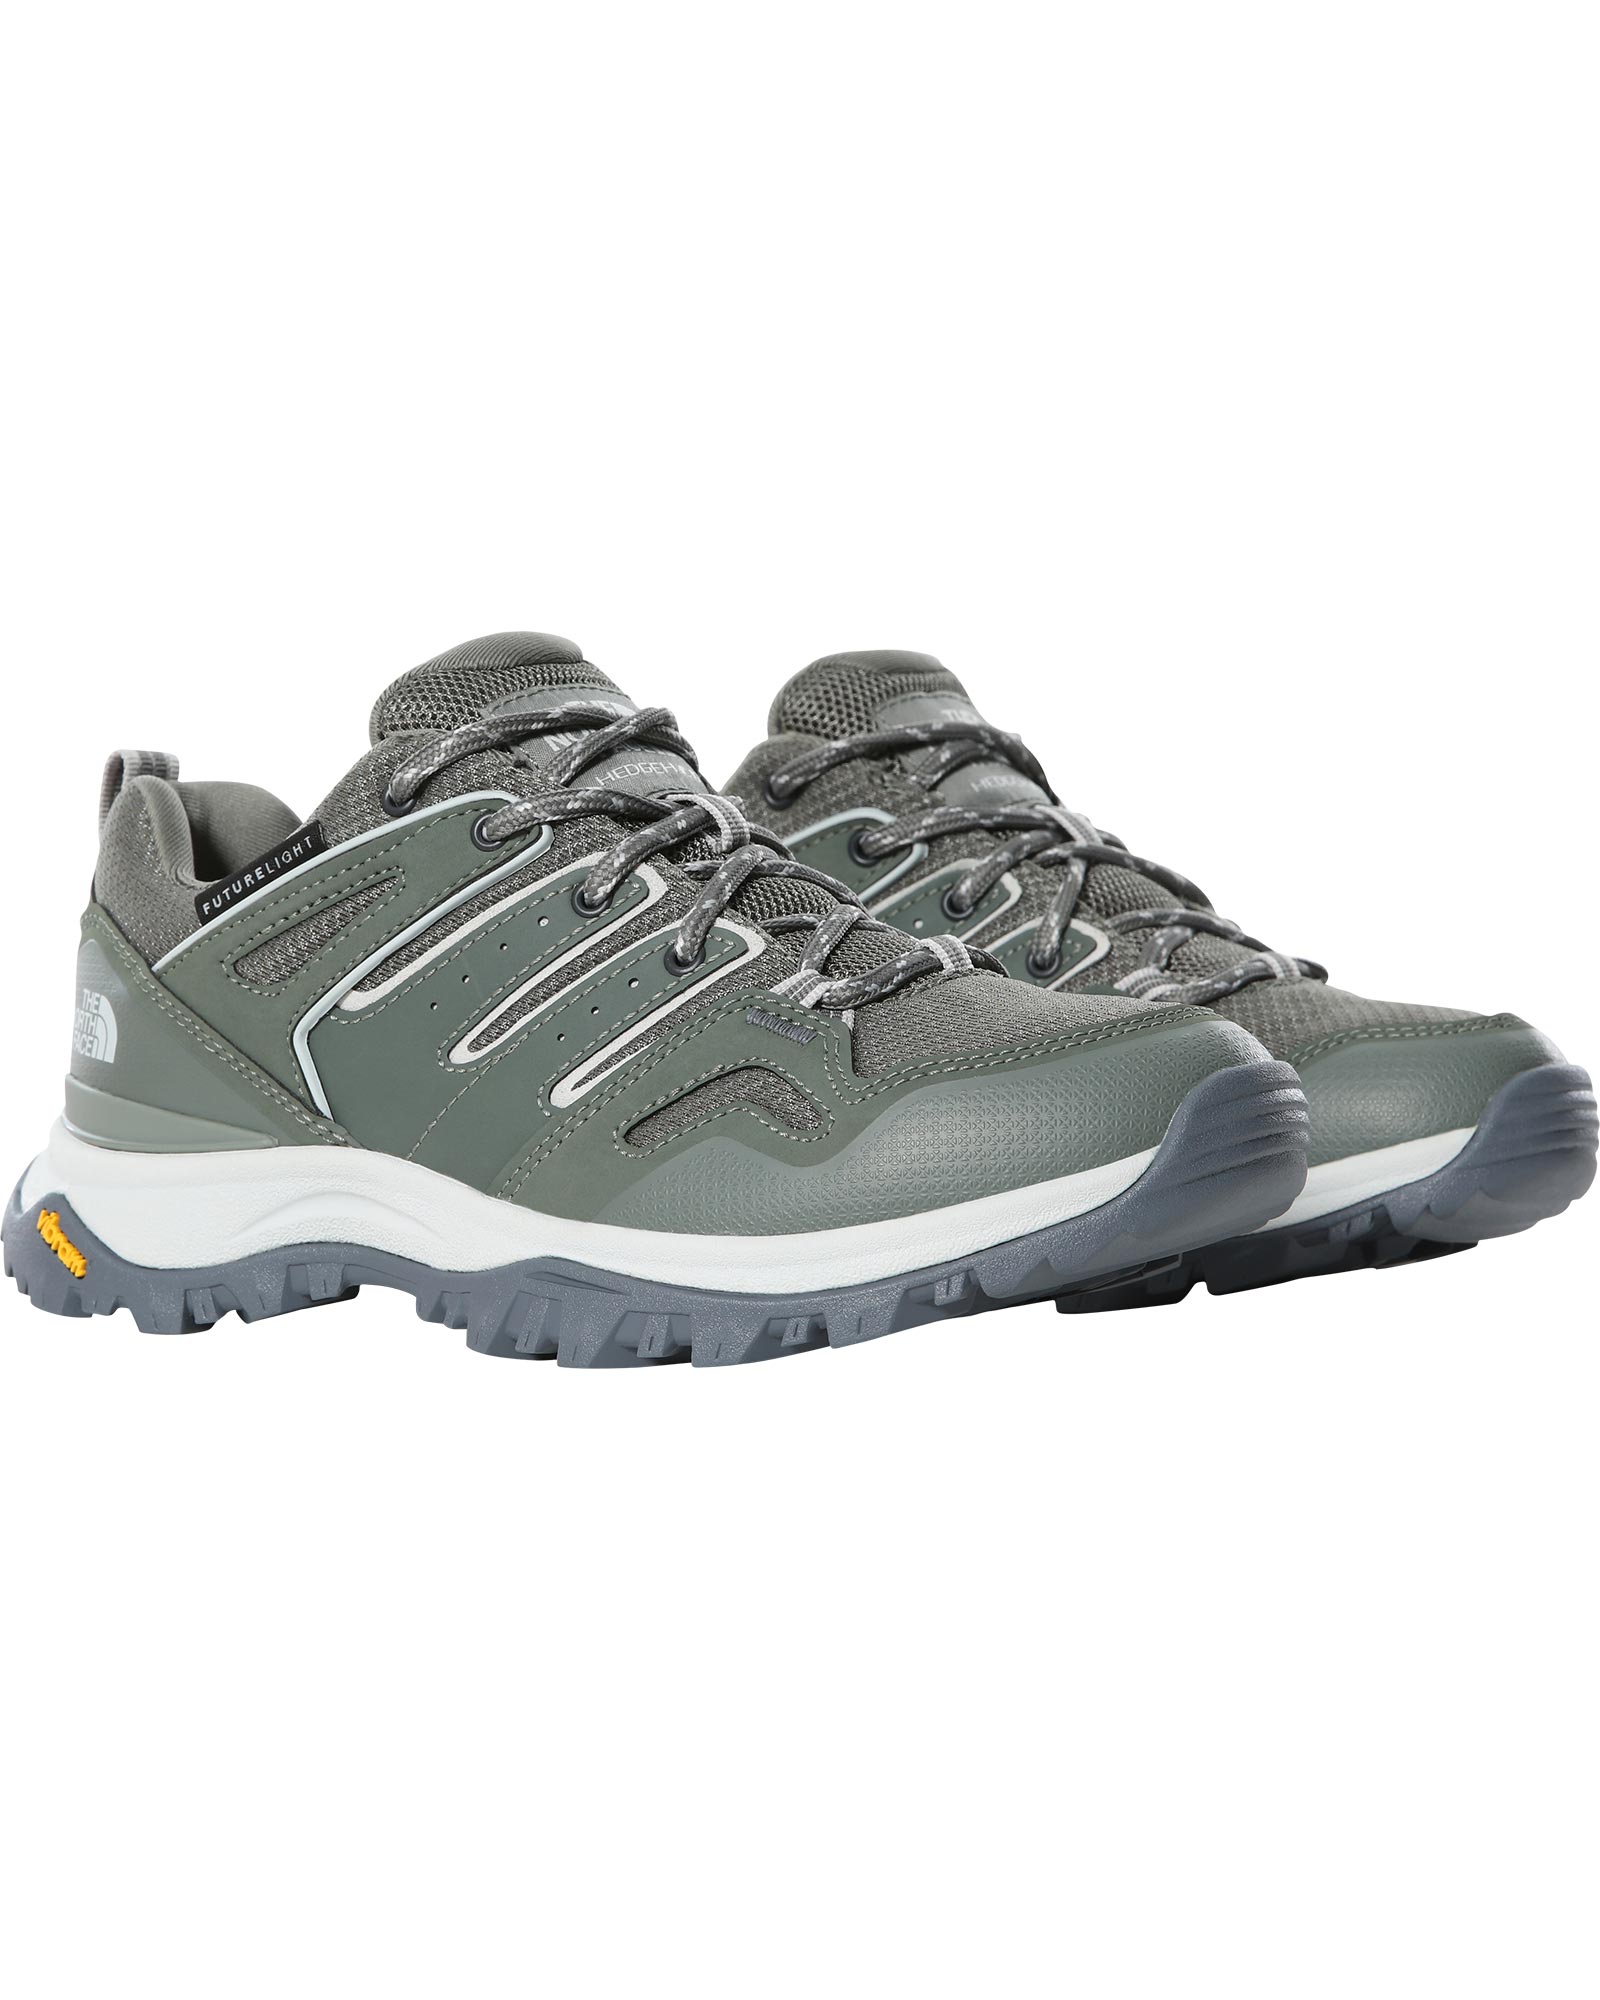 The North Face Hedgehog FUTURELIGHT Women’s Shoes - Agave Green/Tin Grey UK 6.5